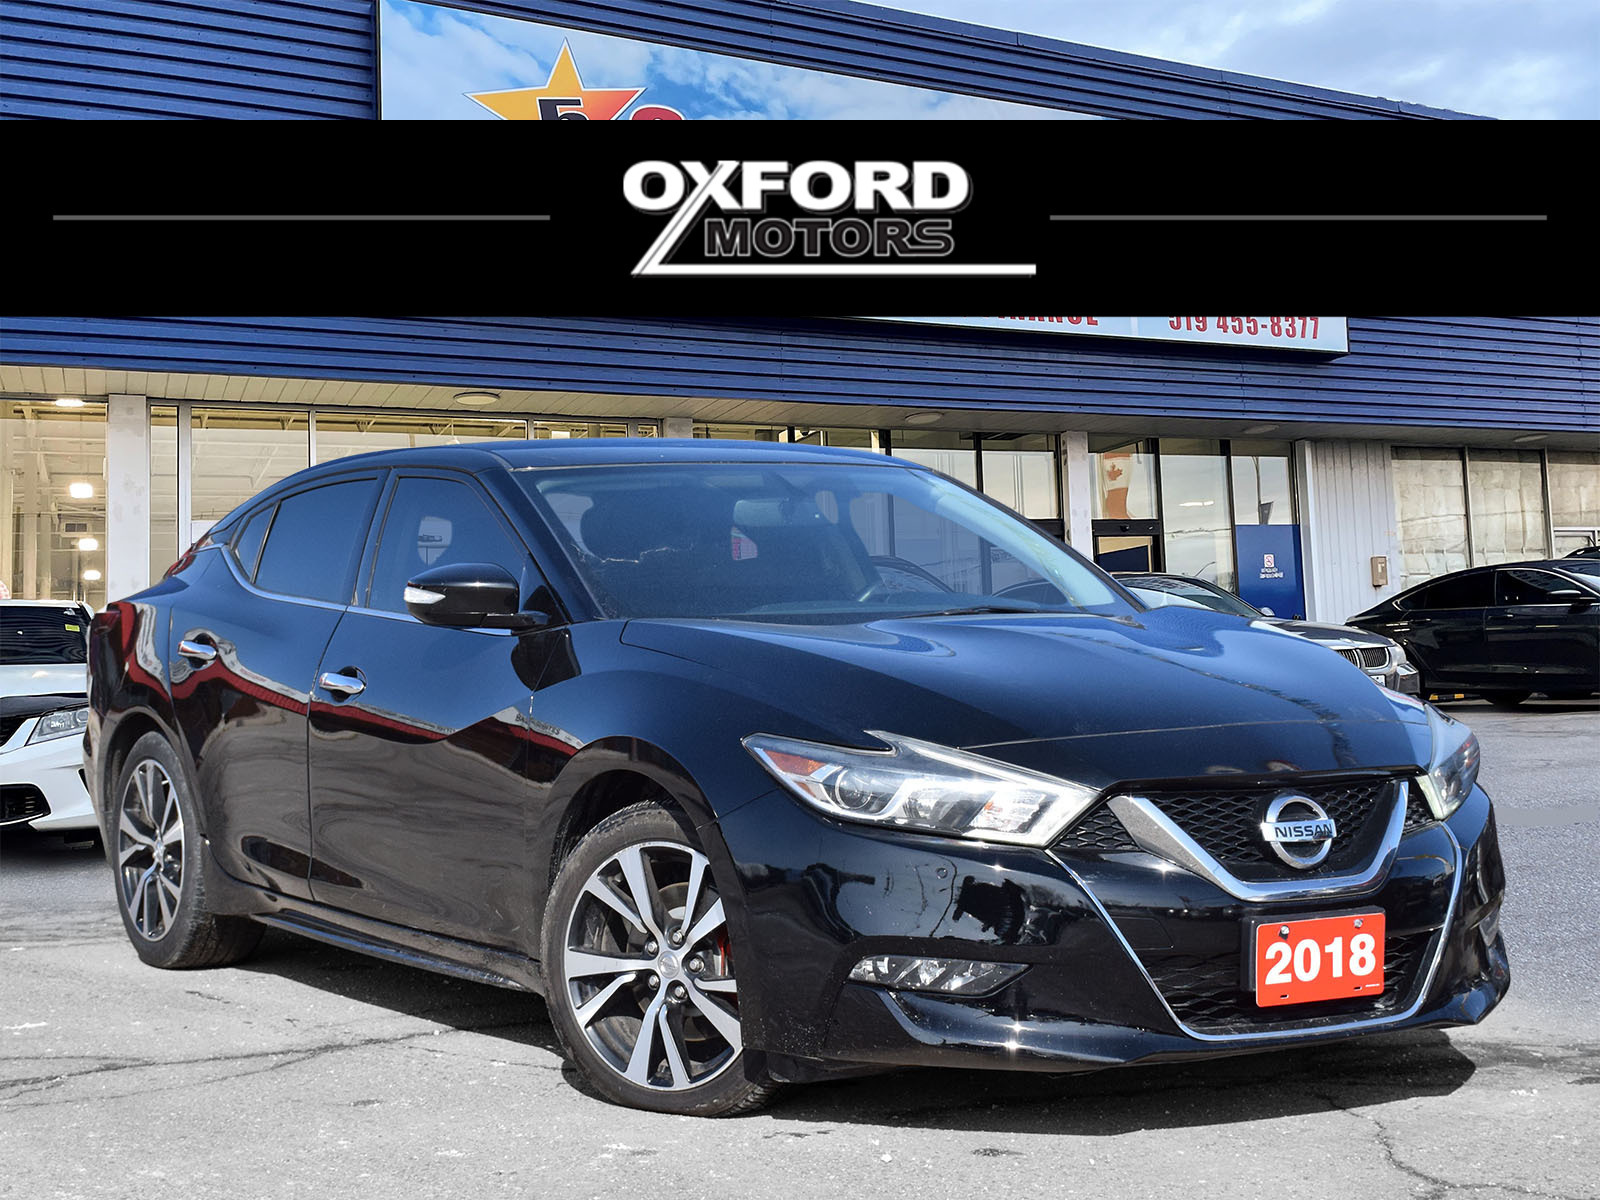 2018 Nissan Maxima LEATHER H-SEATS LOADED! WE FINANCE ALL CREDIT!